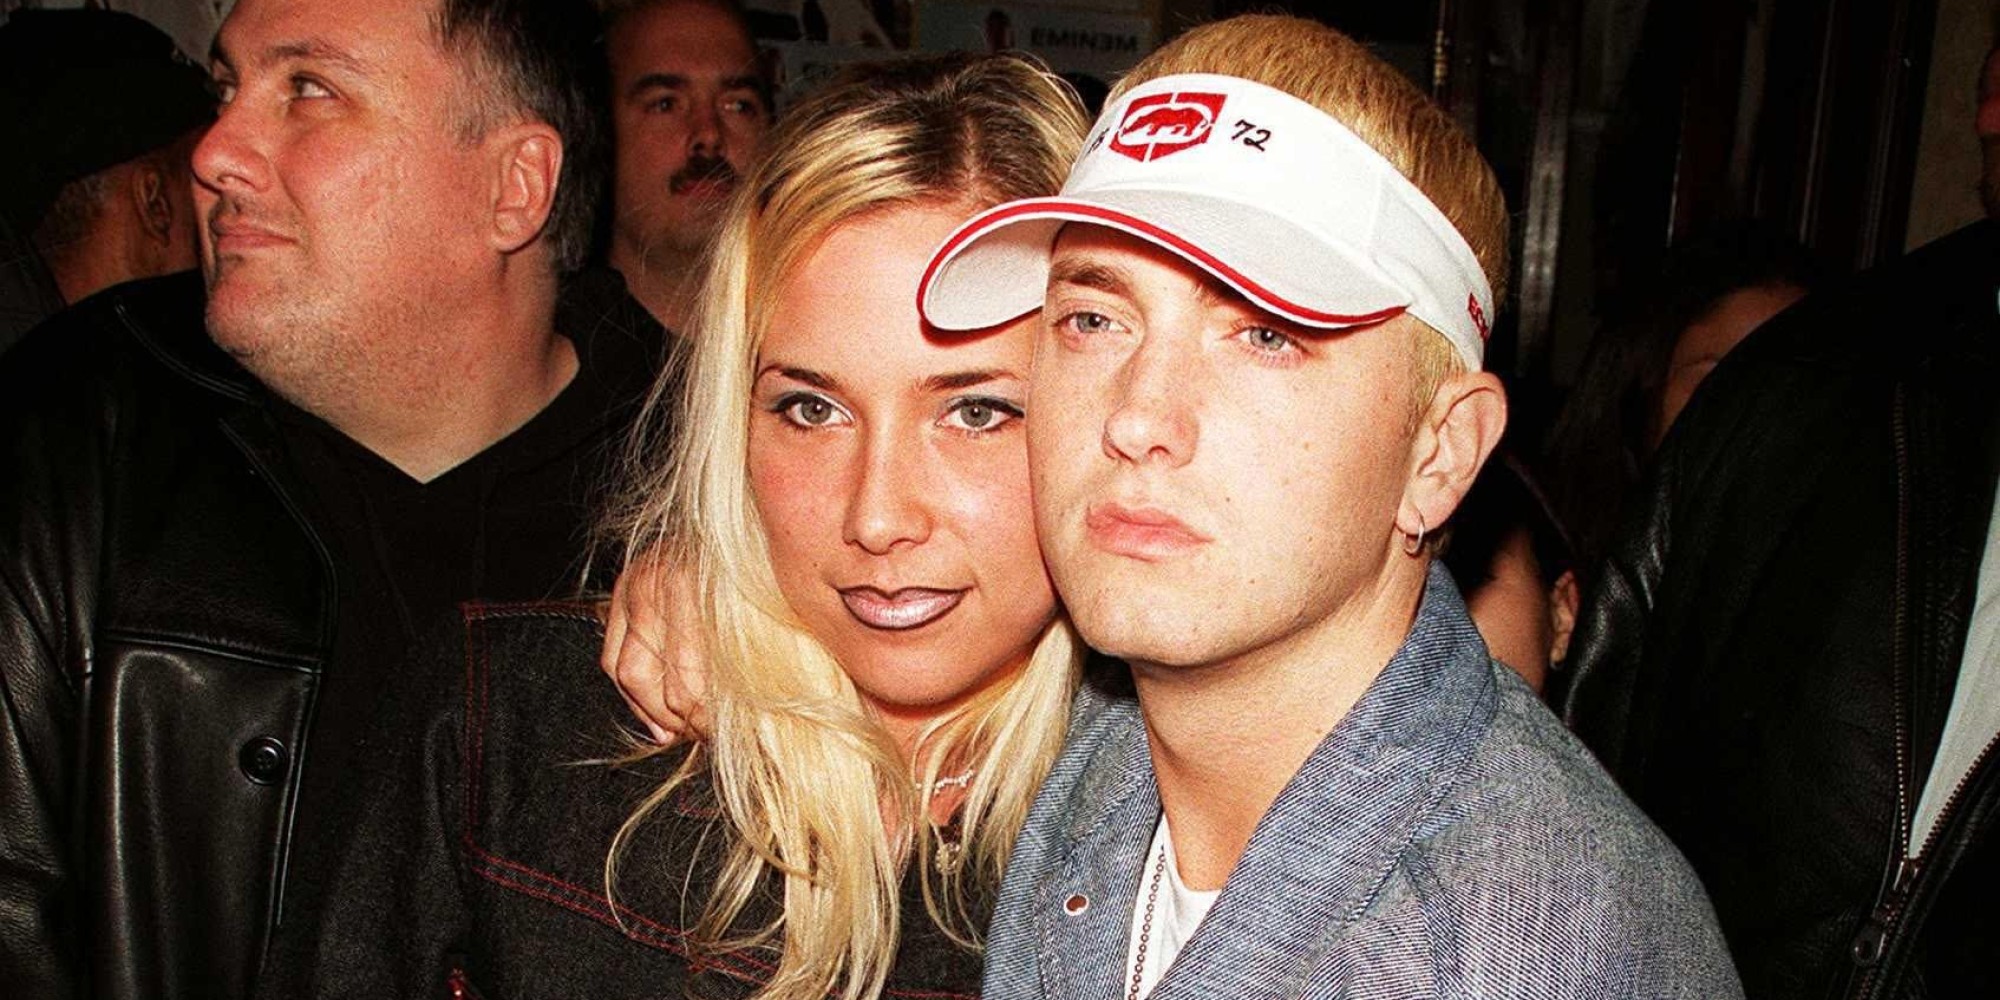 Eminem And Kim Mathers Back Together? Rapper Has Reportedly Reconciled With His Ex